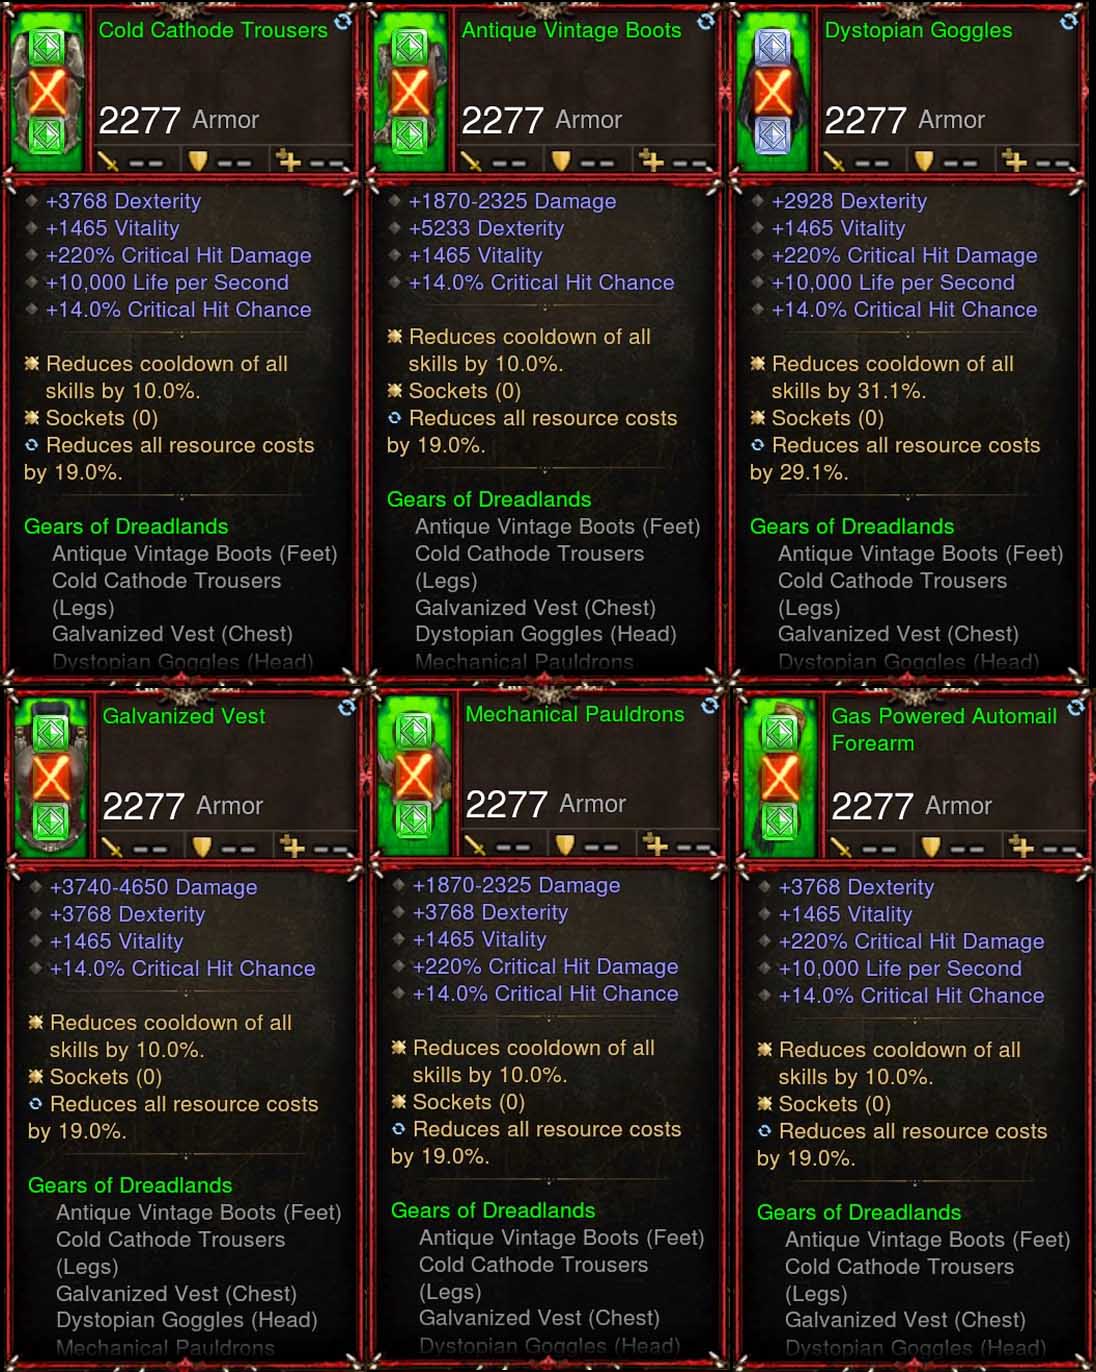 [Primal Ancient] 6x Piece Patch 2.6.9 Dreadlands Demon Hunter Set Diablo 3 Mods ROS Seasonal and Non Seasonal Save Mod - Modded Items and Gear - Hacks - Cheats - Trainers for Playstation 4 - Playstation 5 - Nintendo Switch - Xbox One